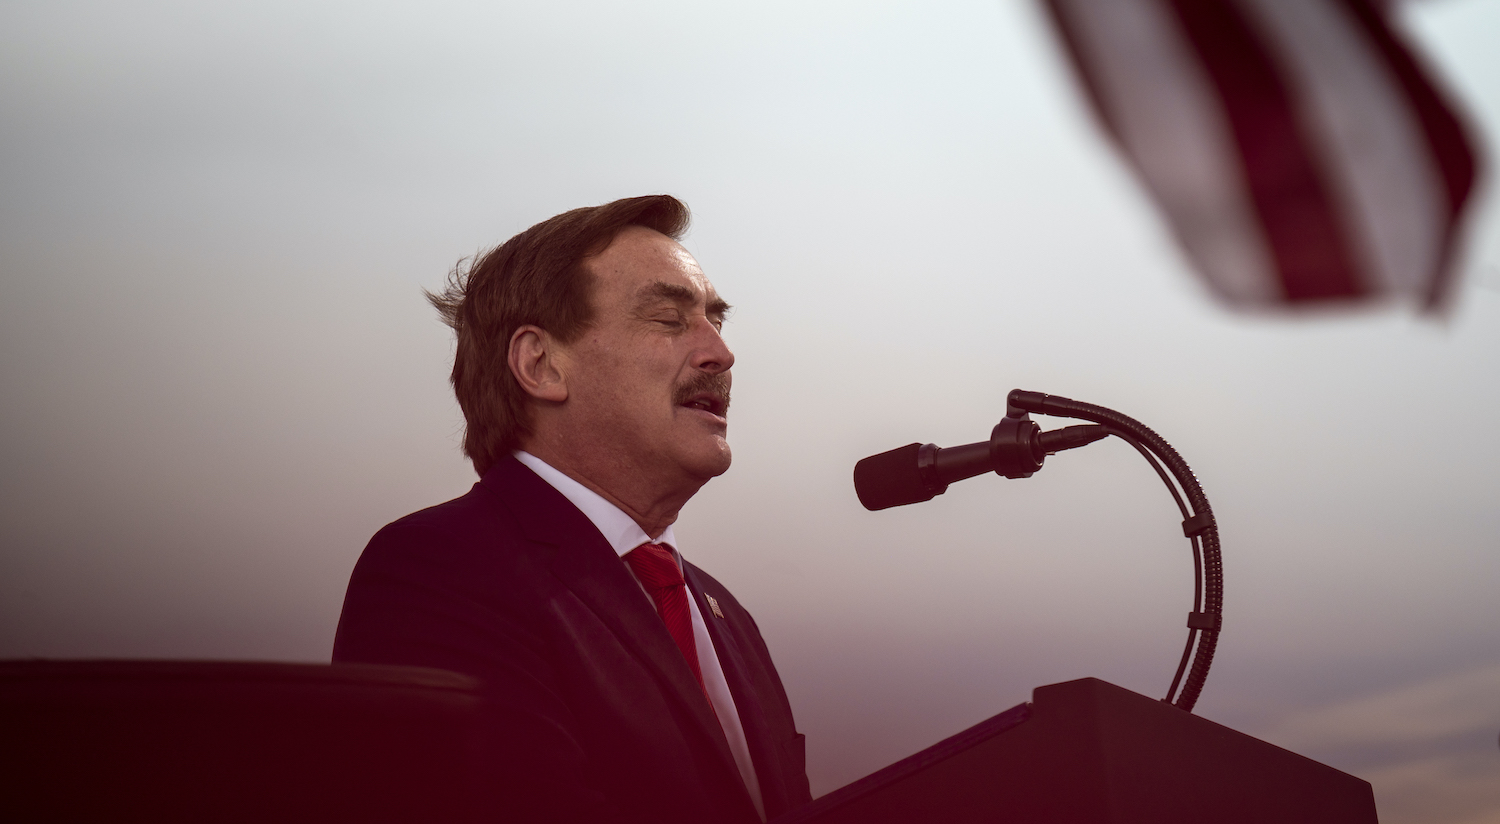 DULUTH, MN - SEPTEMBER 30: Michael Lindell, CEO of MyPillow Inc., speaks during a campaign rally for President Donald Trump at the Duluth International Airport on September 30, 2020 in Duluth, Minnesota. The rally is Trump's first after last night's Presidential Debate. (Photo by Stephen Maturen/Getty Images)